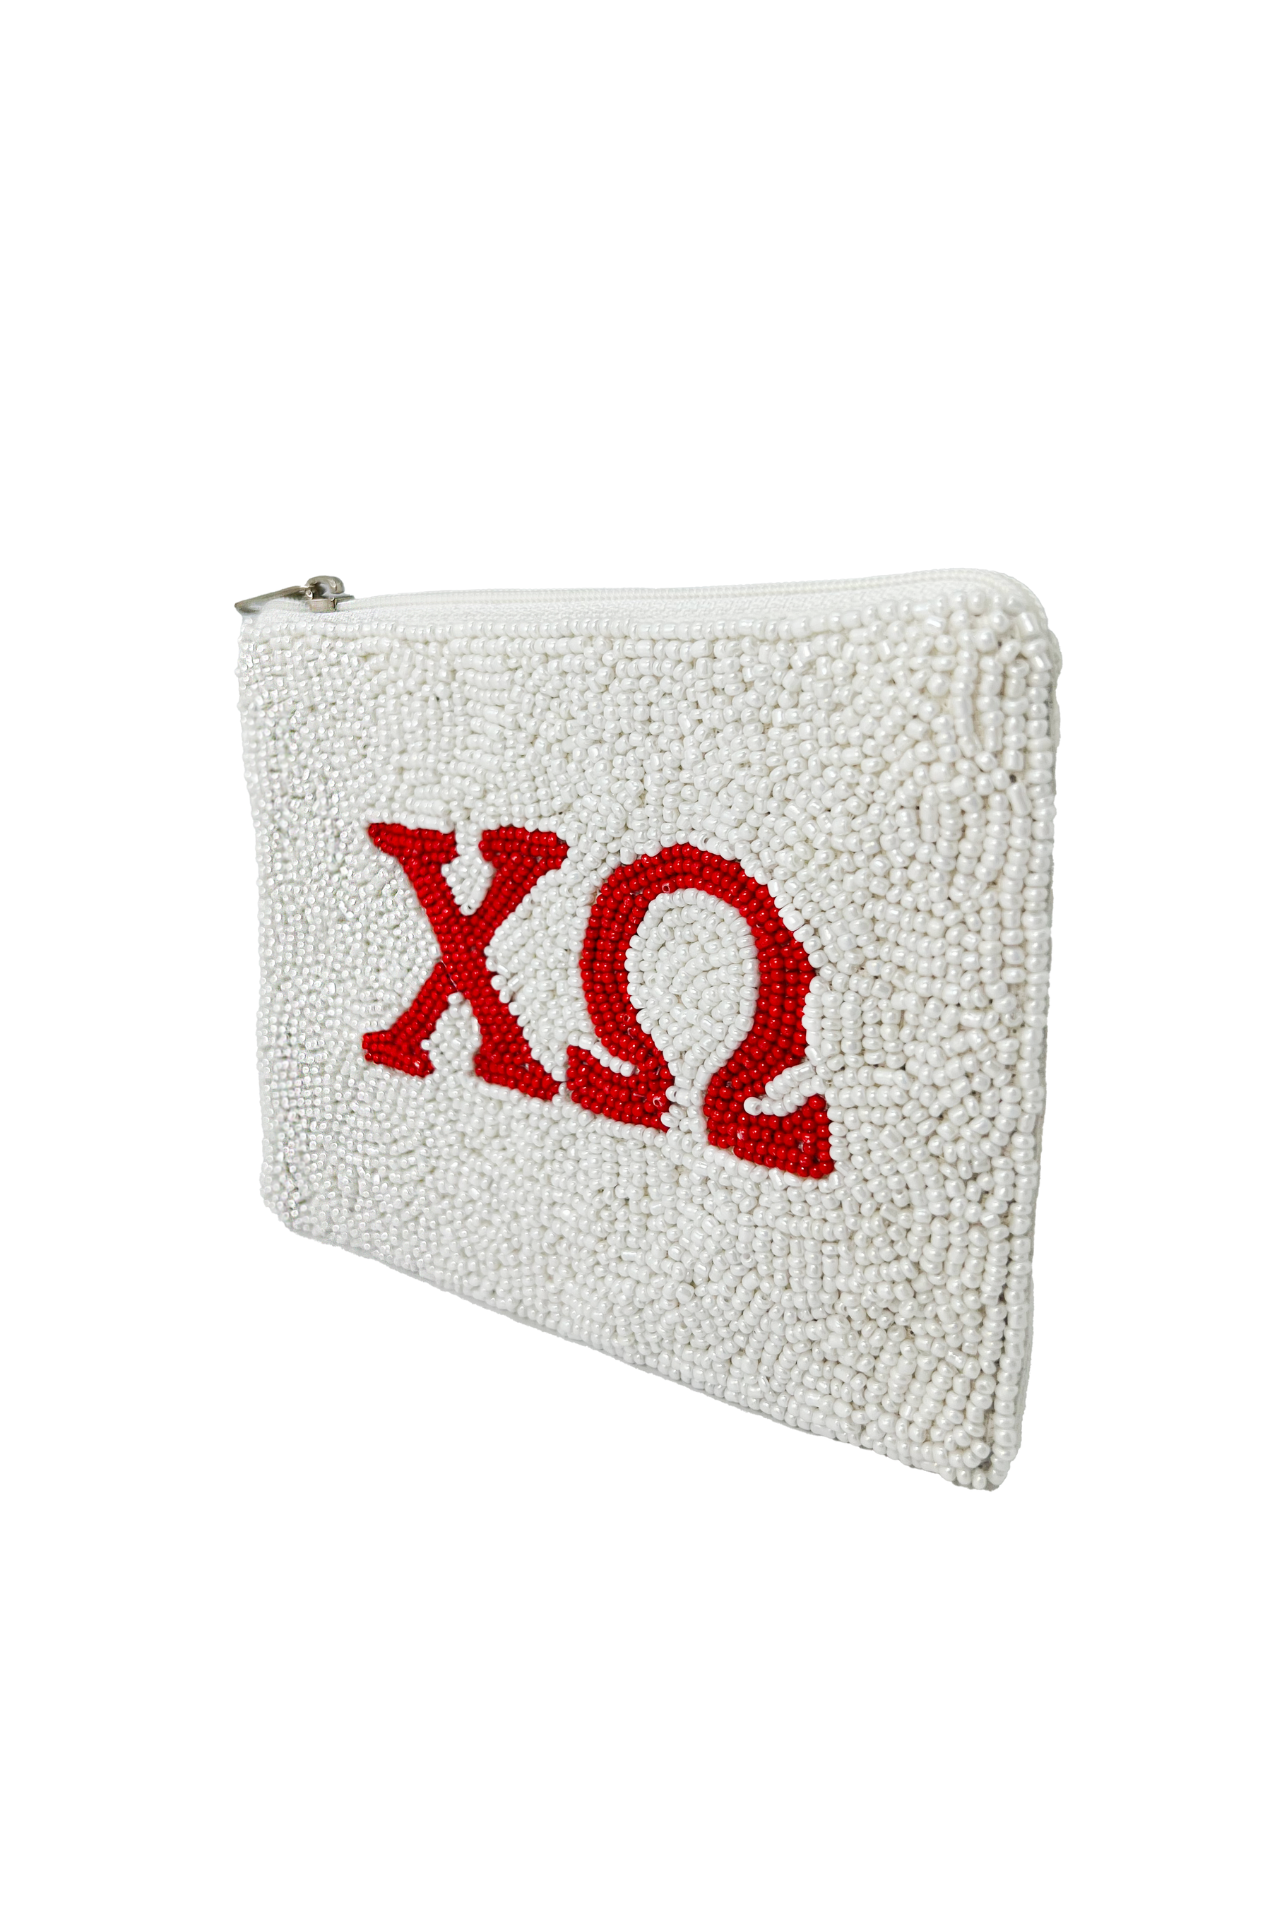 Chi Omega Pouch